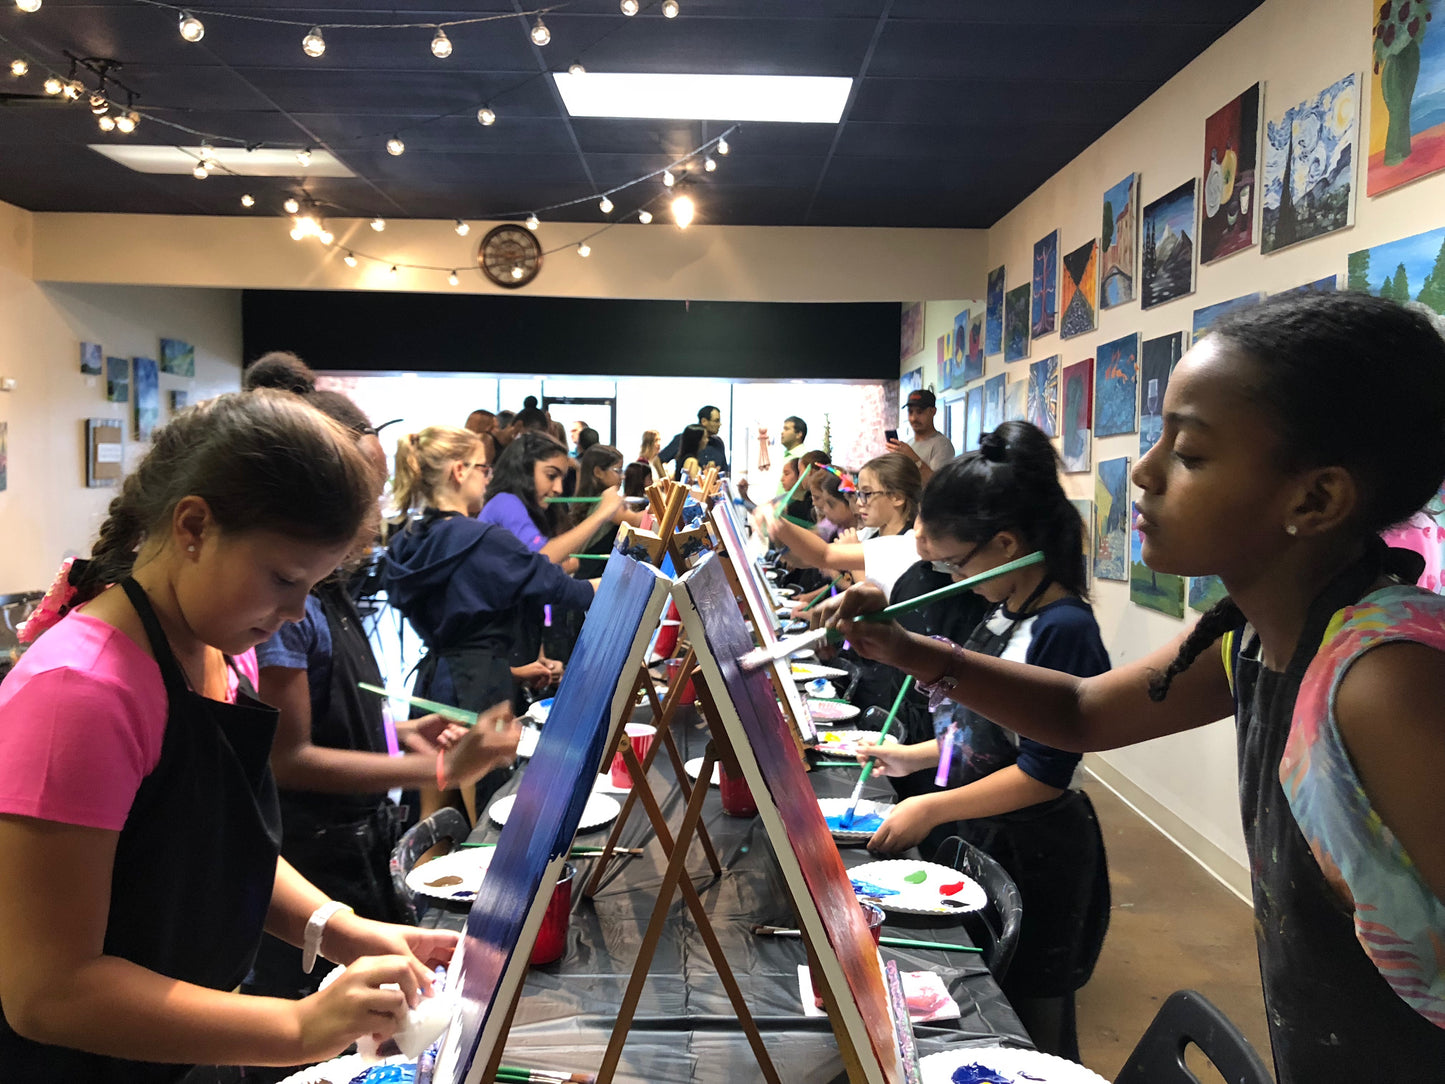 Sun, Oct 28, 3-6pm "My Colorful Journey" PRIVATE Houston Kids Paint Party